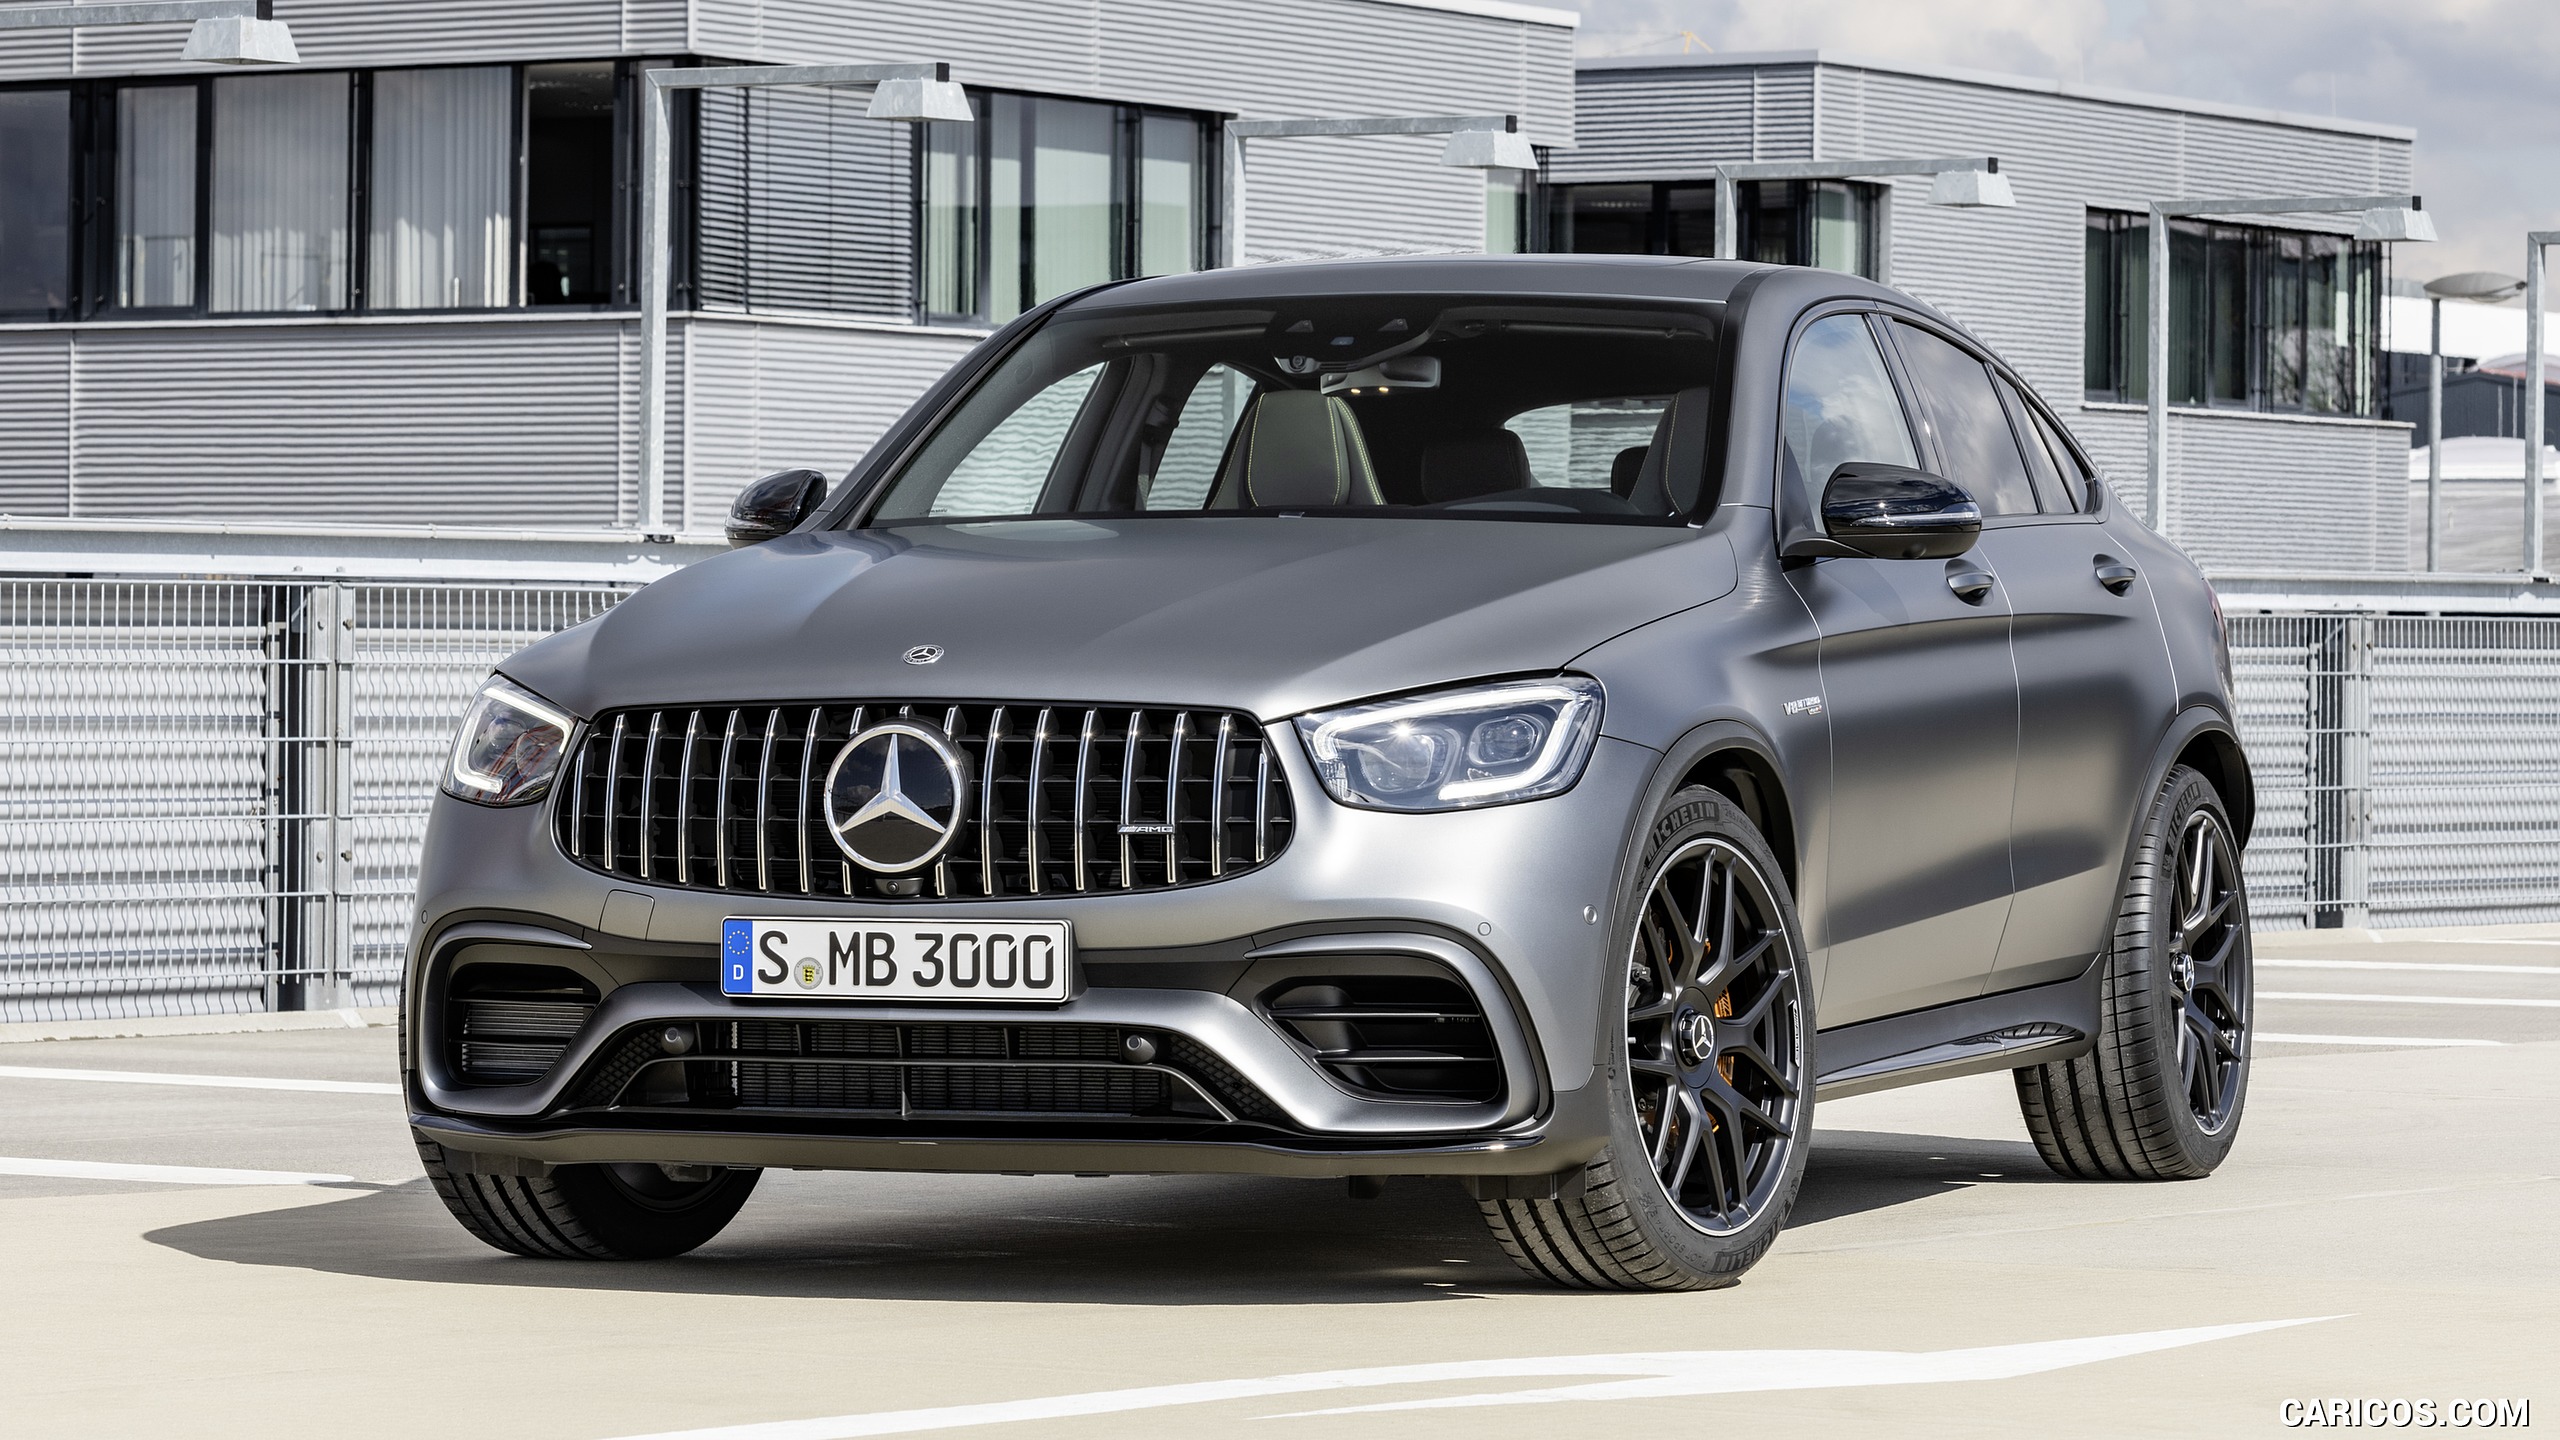 2020 Mercedes-AMG GLC 63 S 4MATIC+ Coupe - Front, #8 of 102